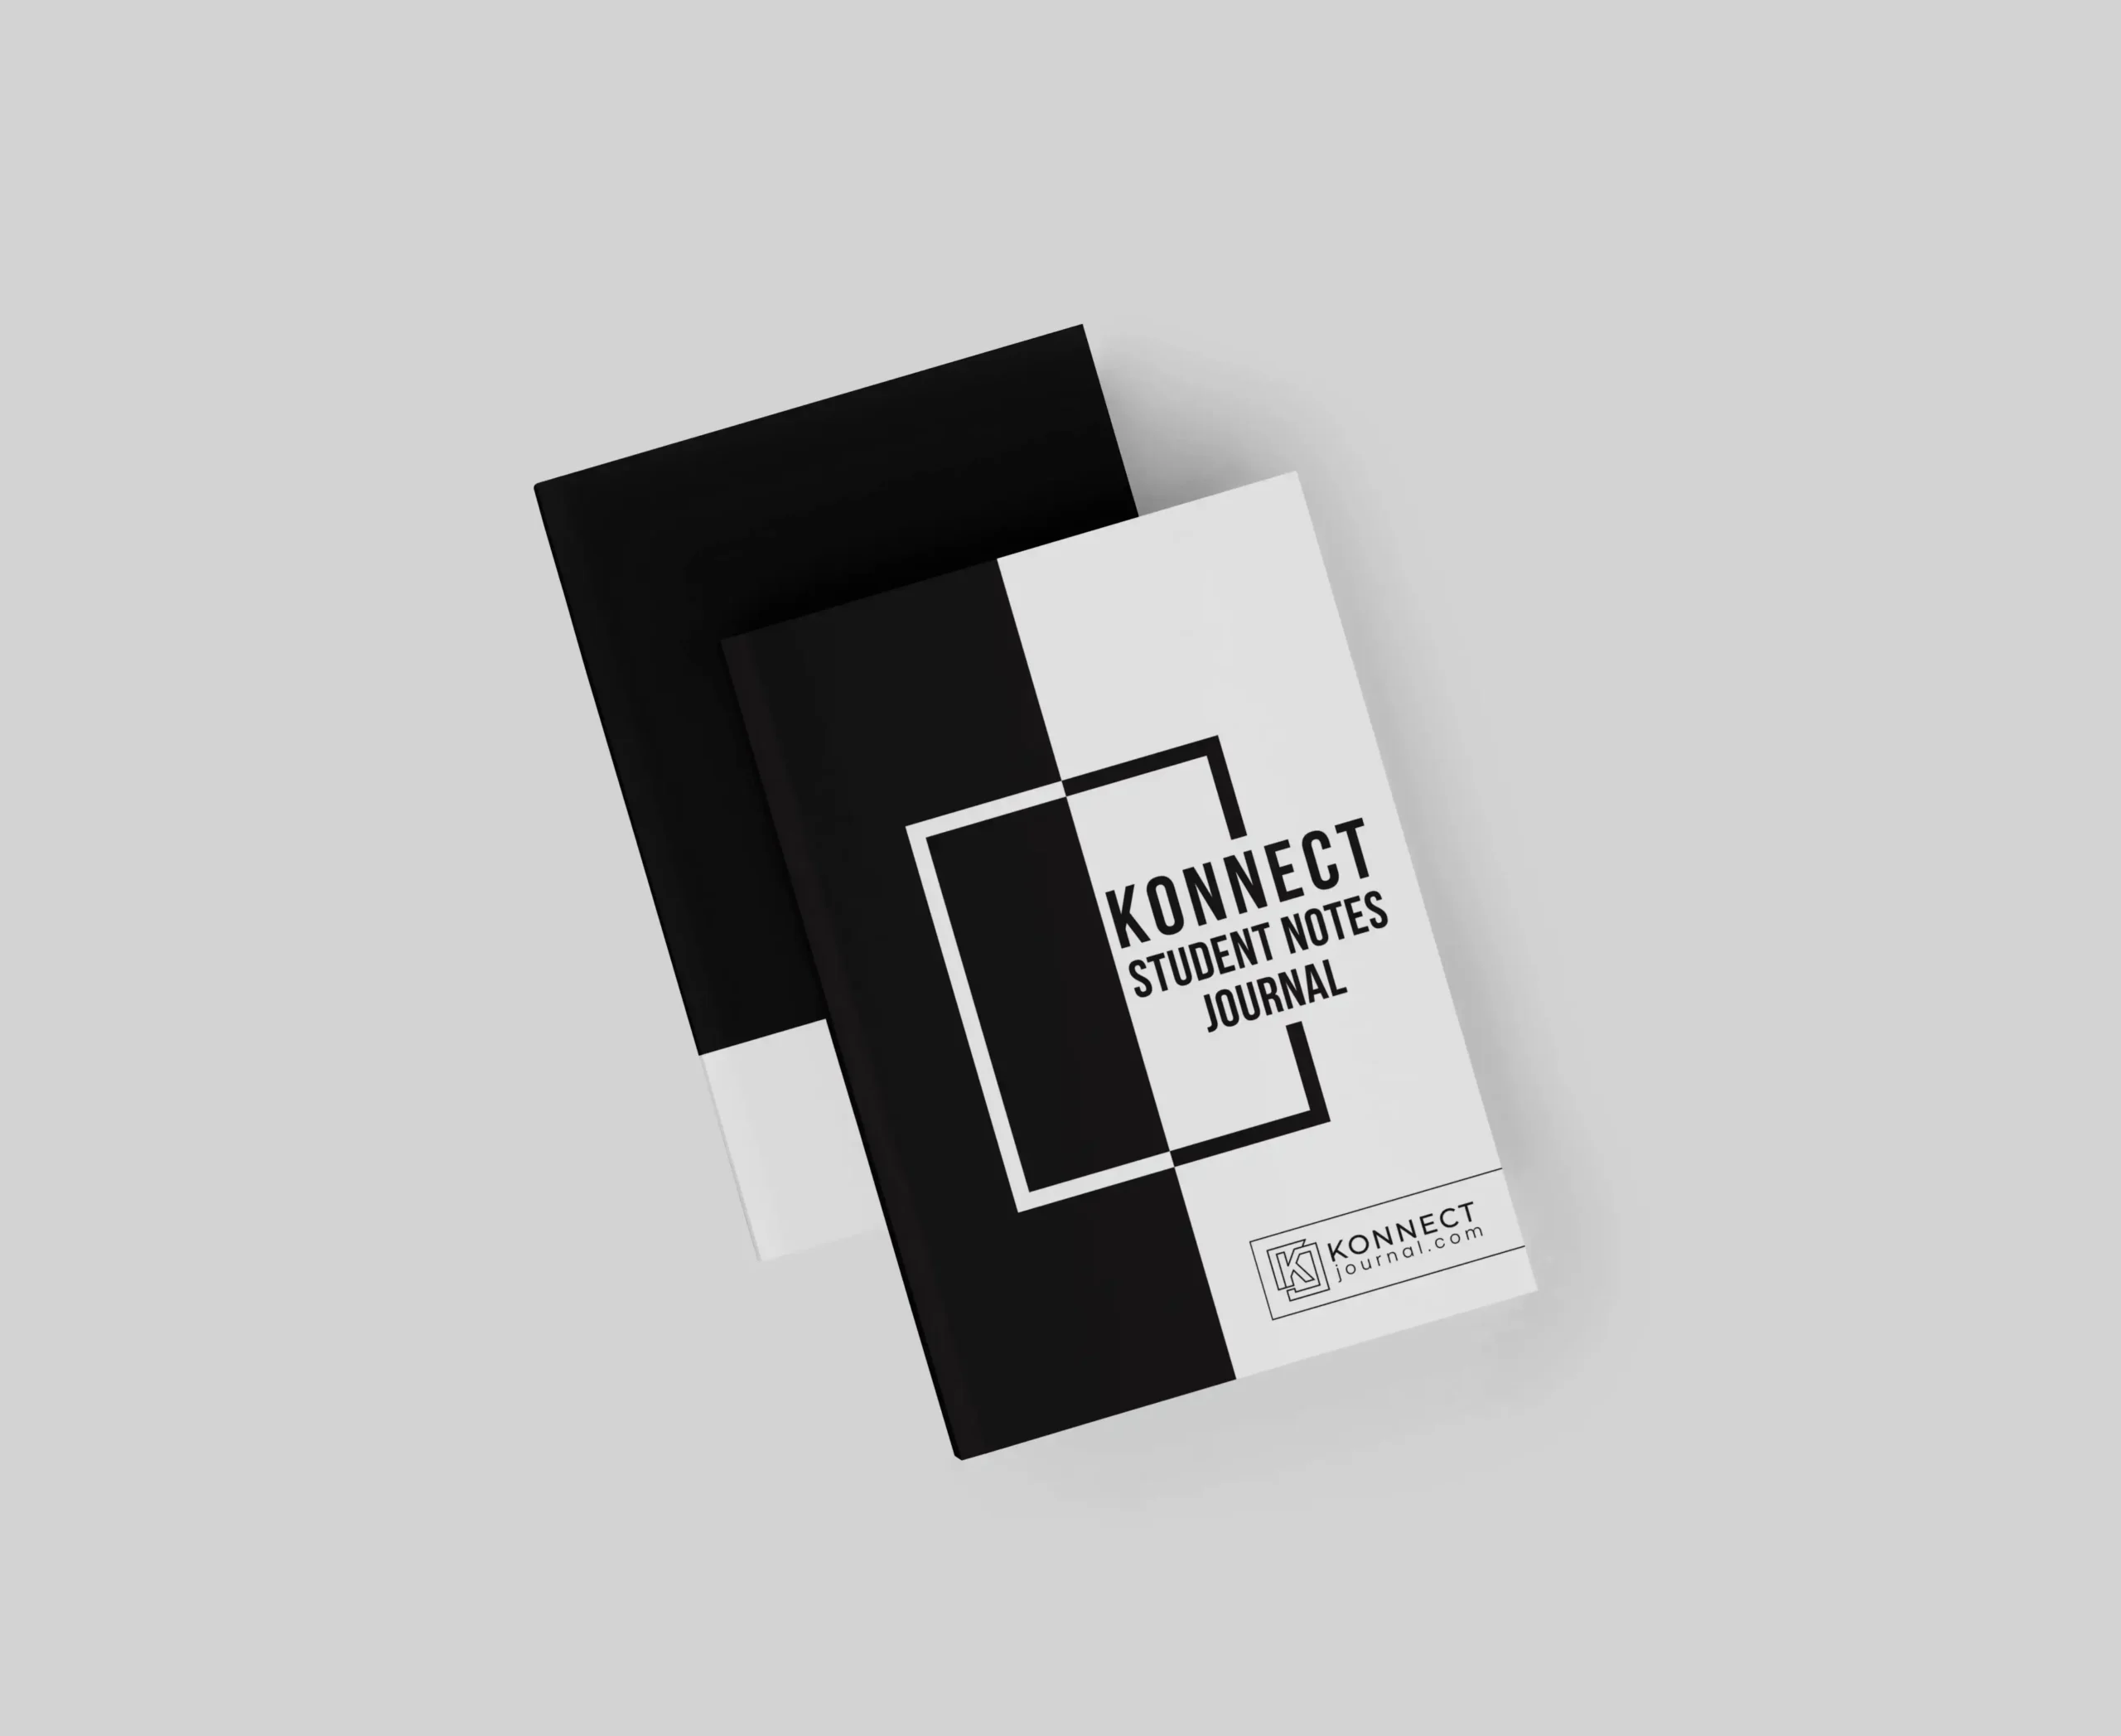 Konnect Student Notes Journal